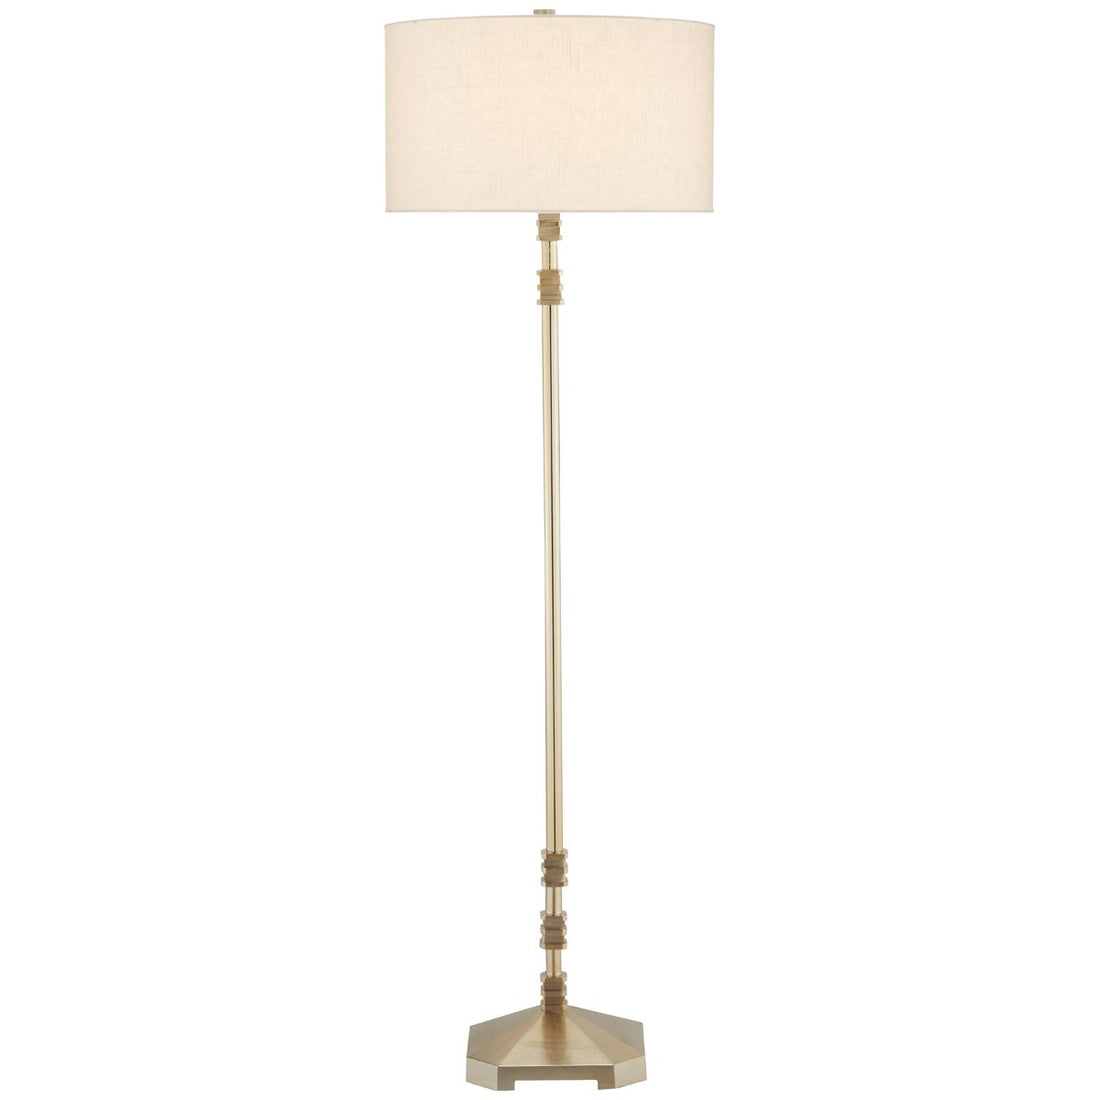 Currey and Company Pilare Floor Lamp